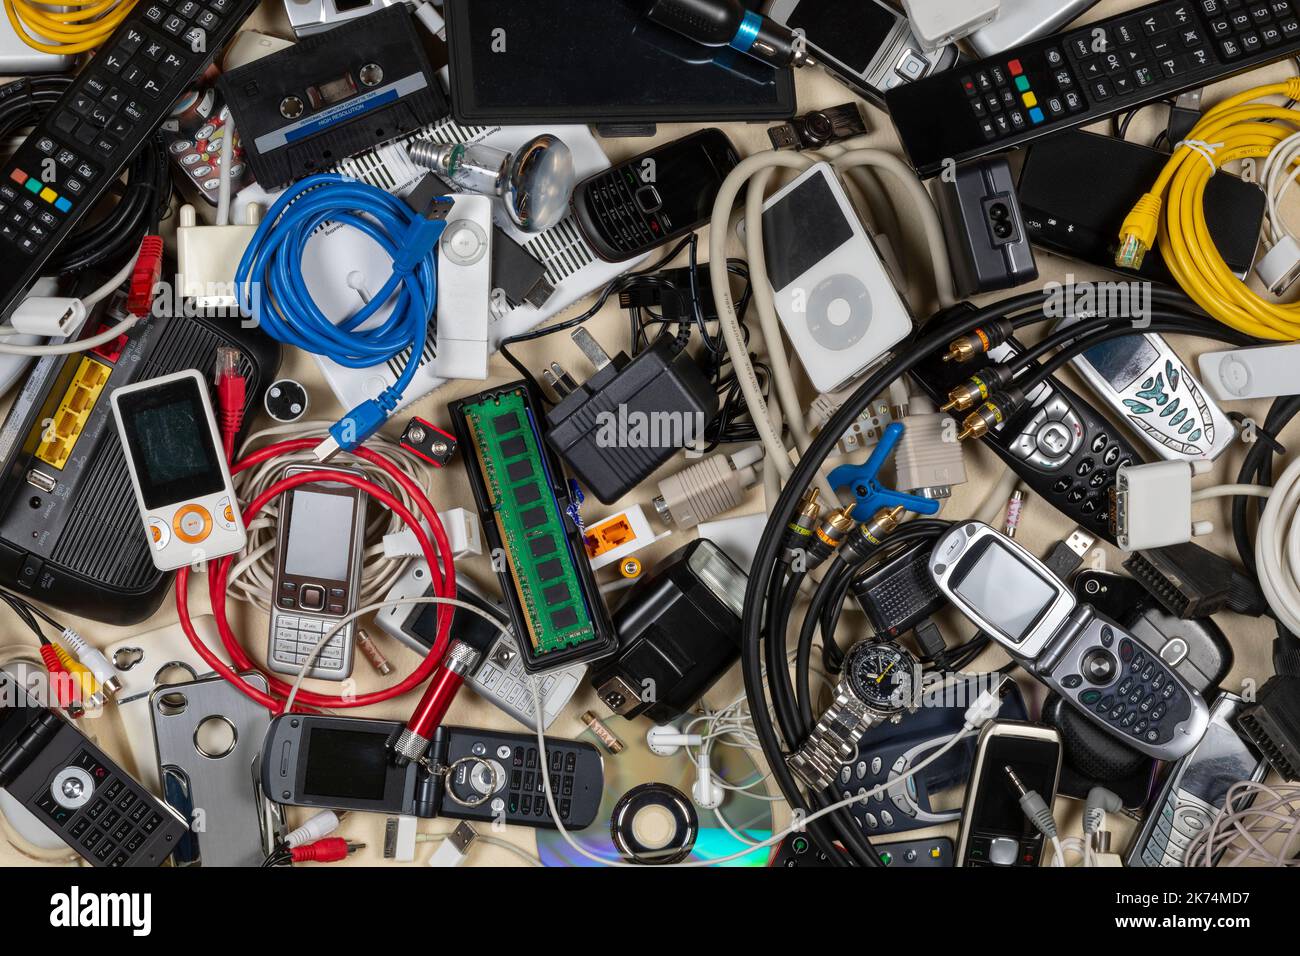 Old out of date technology. Electrical items no longer of any use. Obsolete electrical waste for recycling. Stock Photo